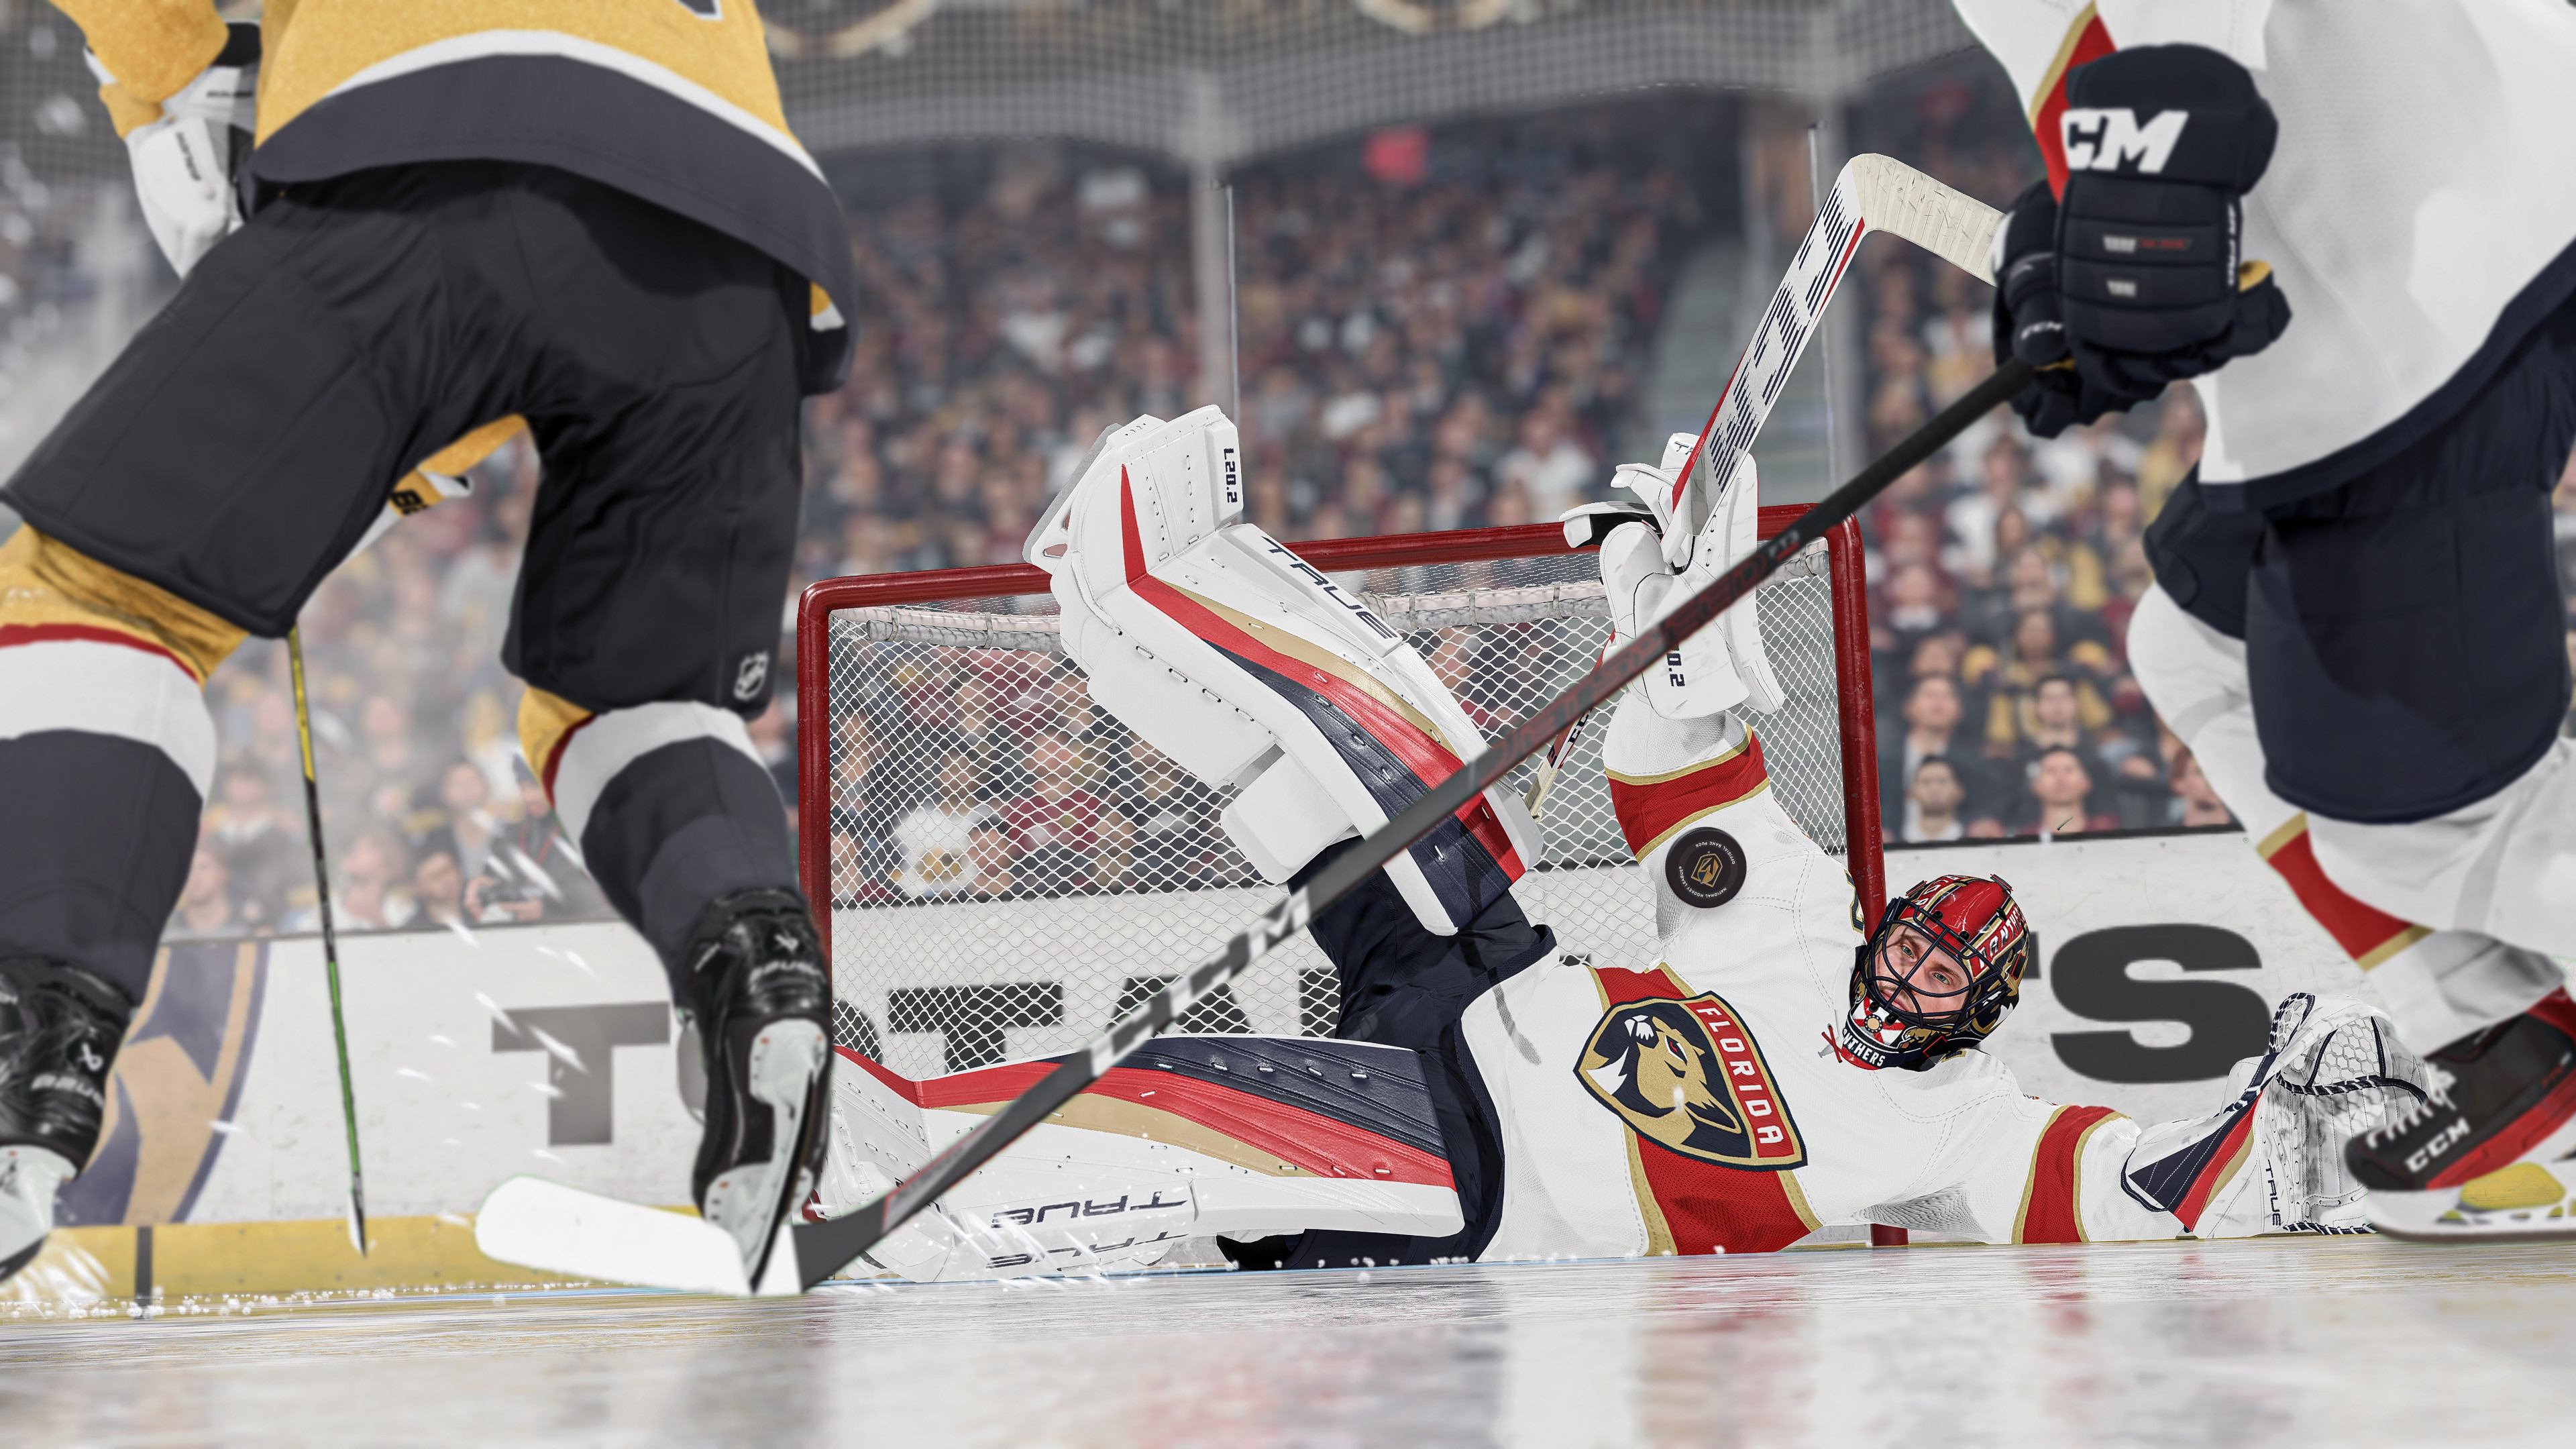 NHL 19' Release Date, Cover Athlete, New Modes, Pre-Order Details